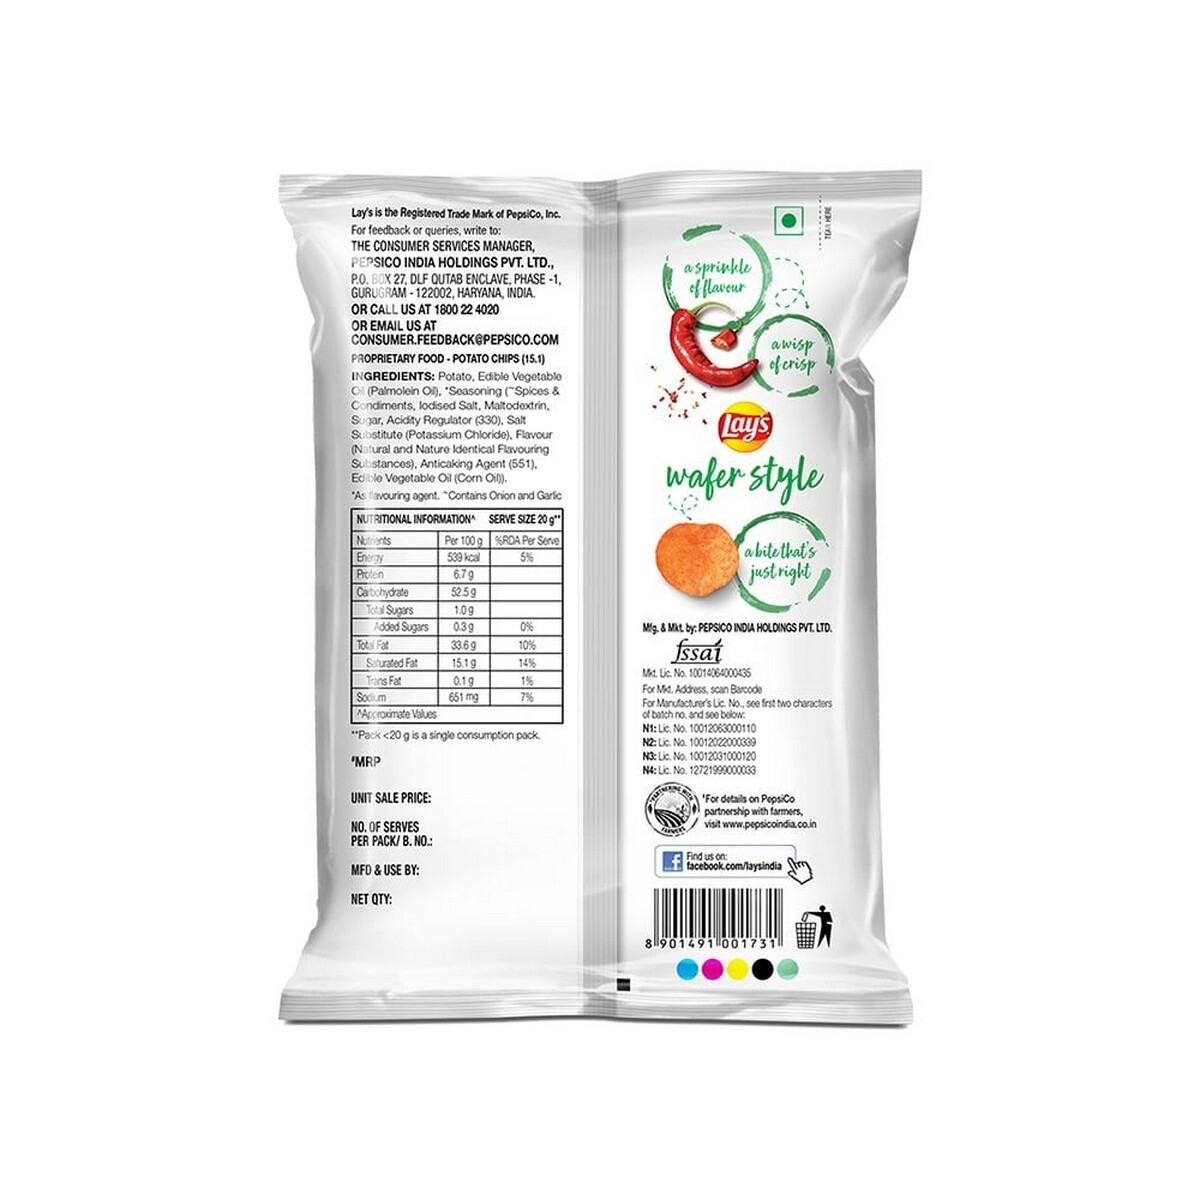 Lays Wafer Style Chilli 48g